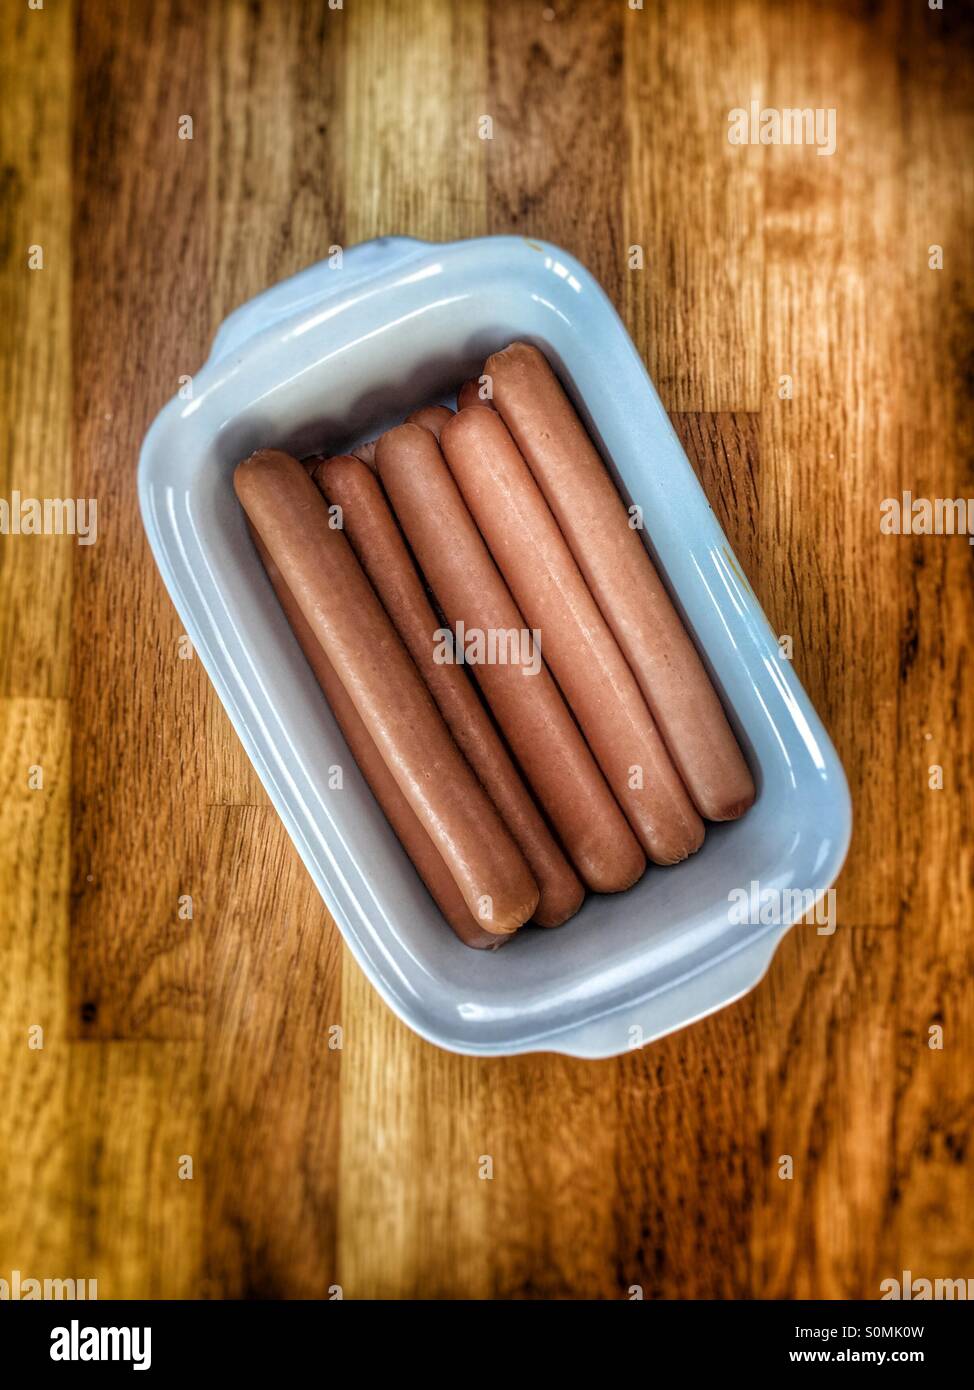 Hot dog sausages. Potential cause of bowel cancer, says World Health Organisation, October 2015 Stock Photo